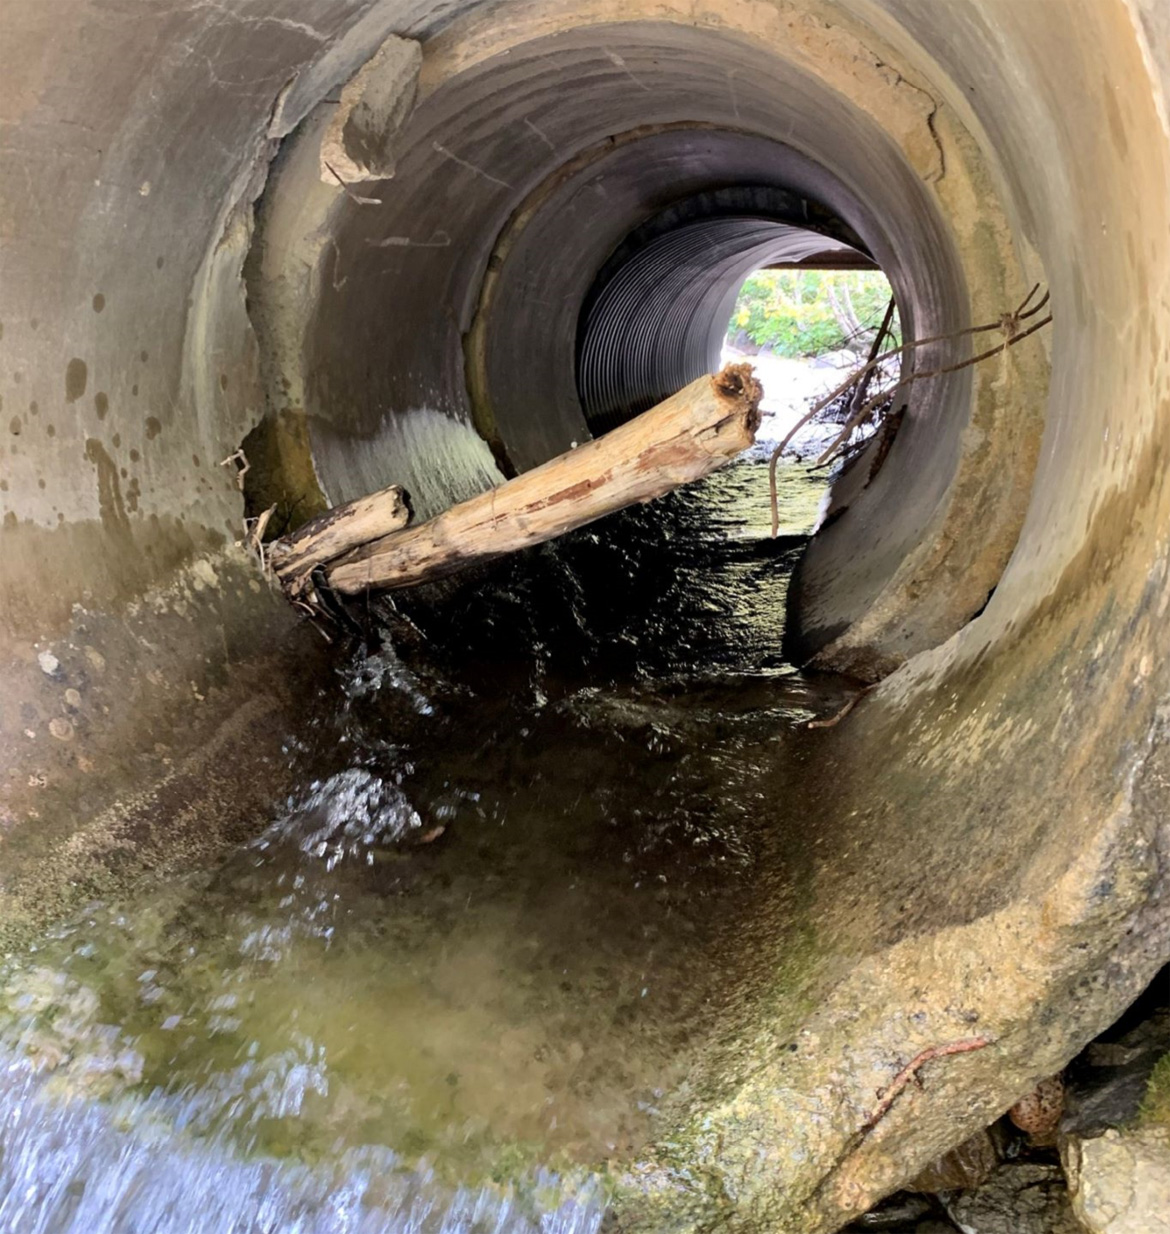 A culvert in bad condition. A damaged concrete pipe with obstructions.